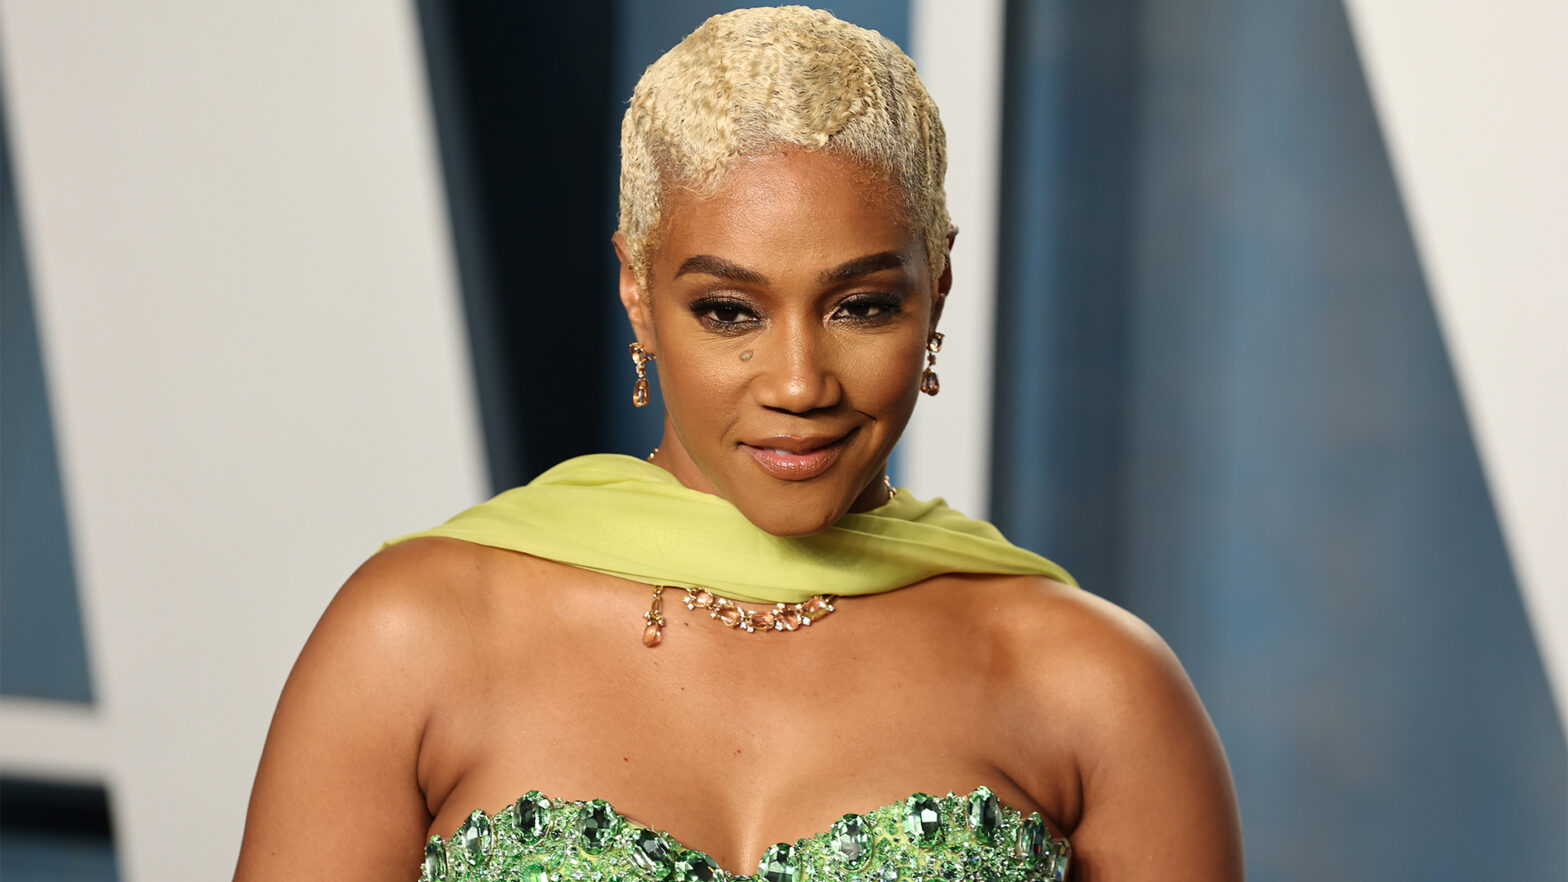 #Goals: Tiffany Haddish Reveals Her Favorite Place To Travel Is Her Own Island!